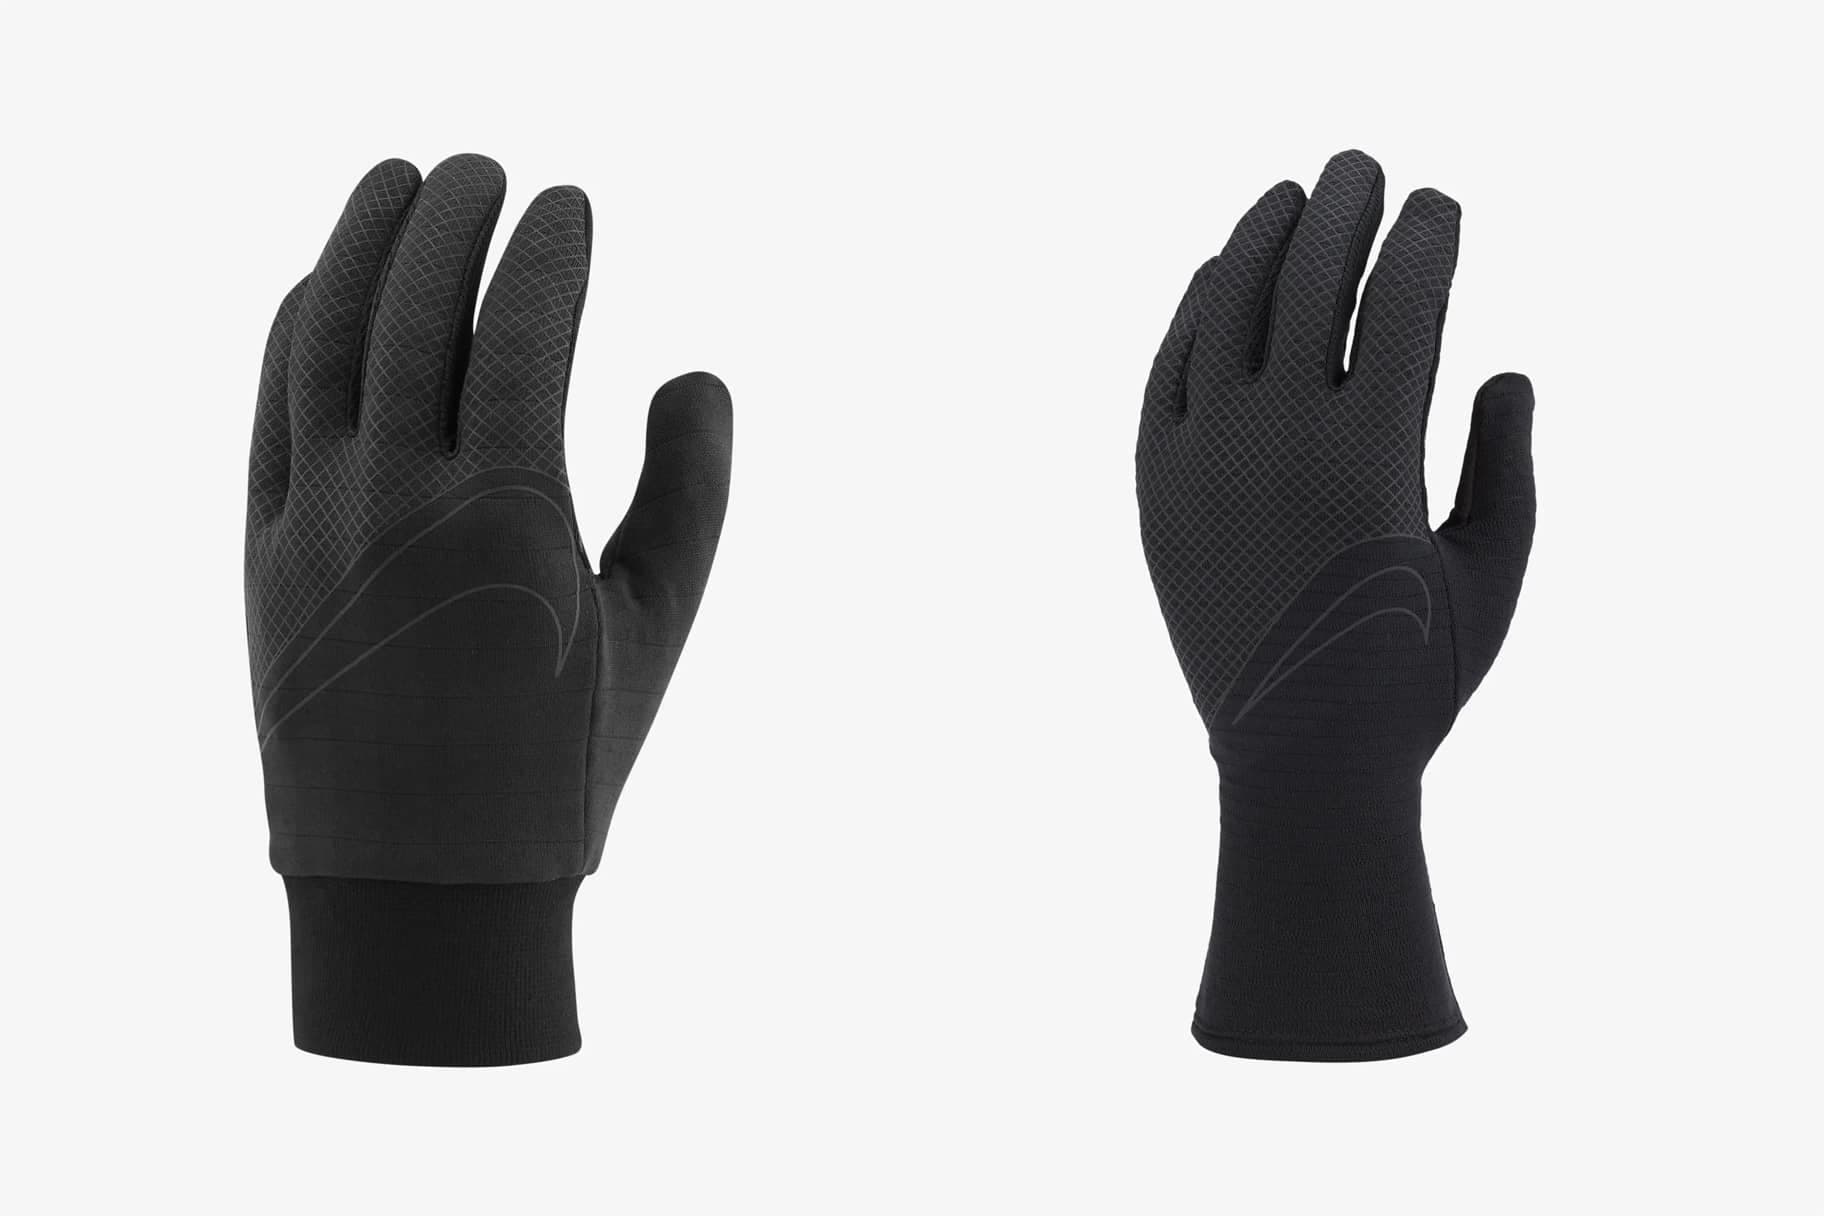 ensayo Último consumo The 5 Best Running Gloves You Can Buy at Nike. Nike.com